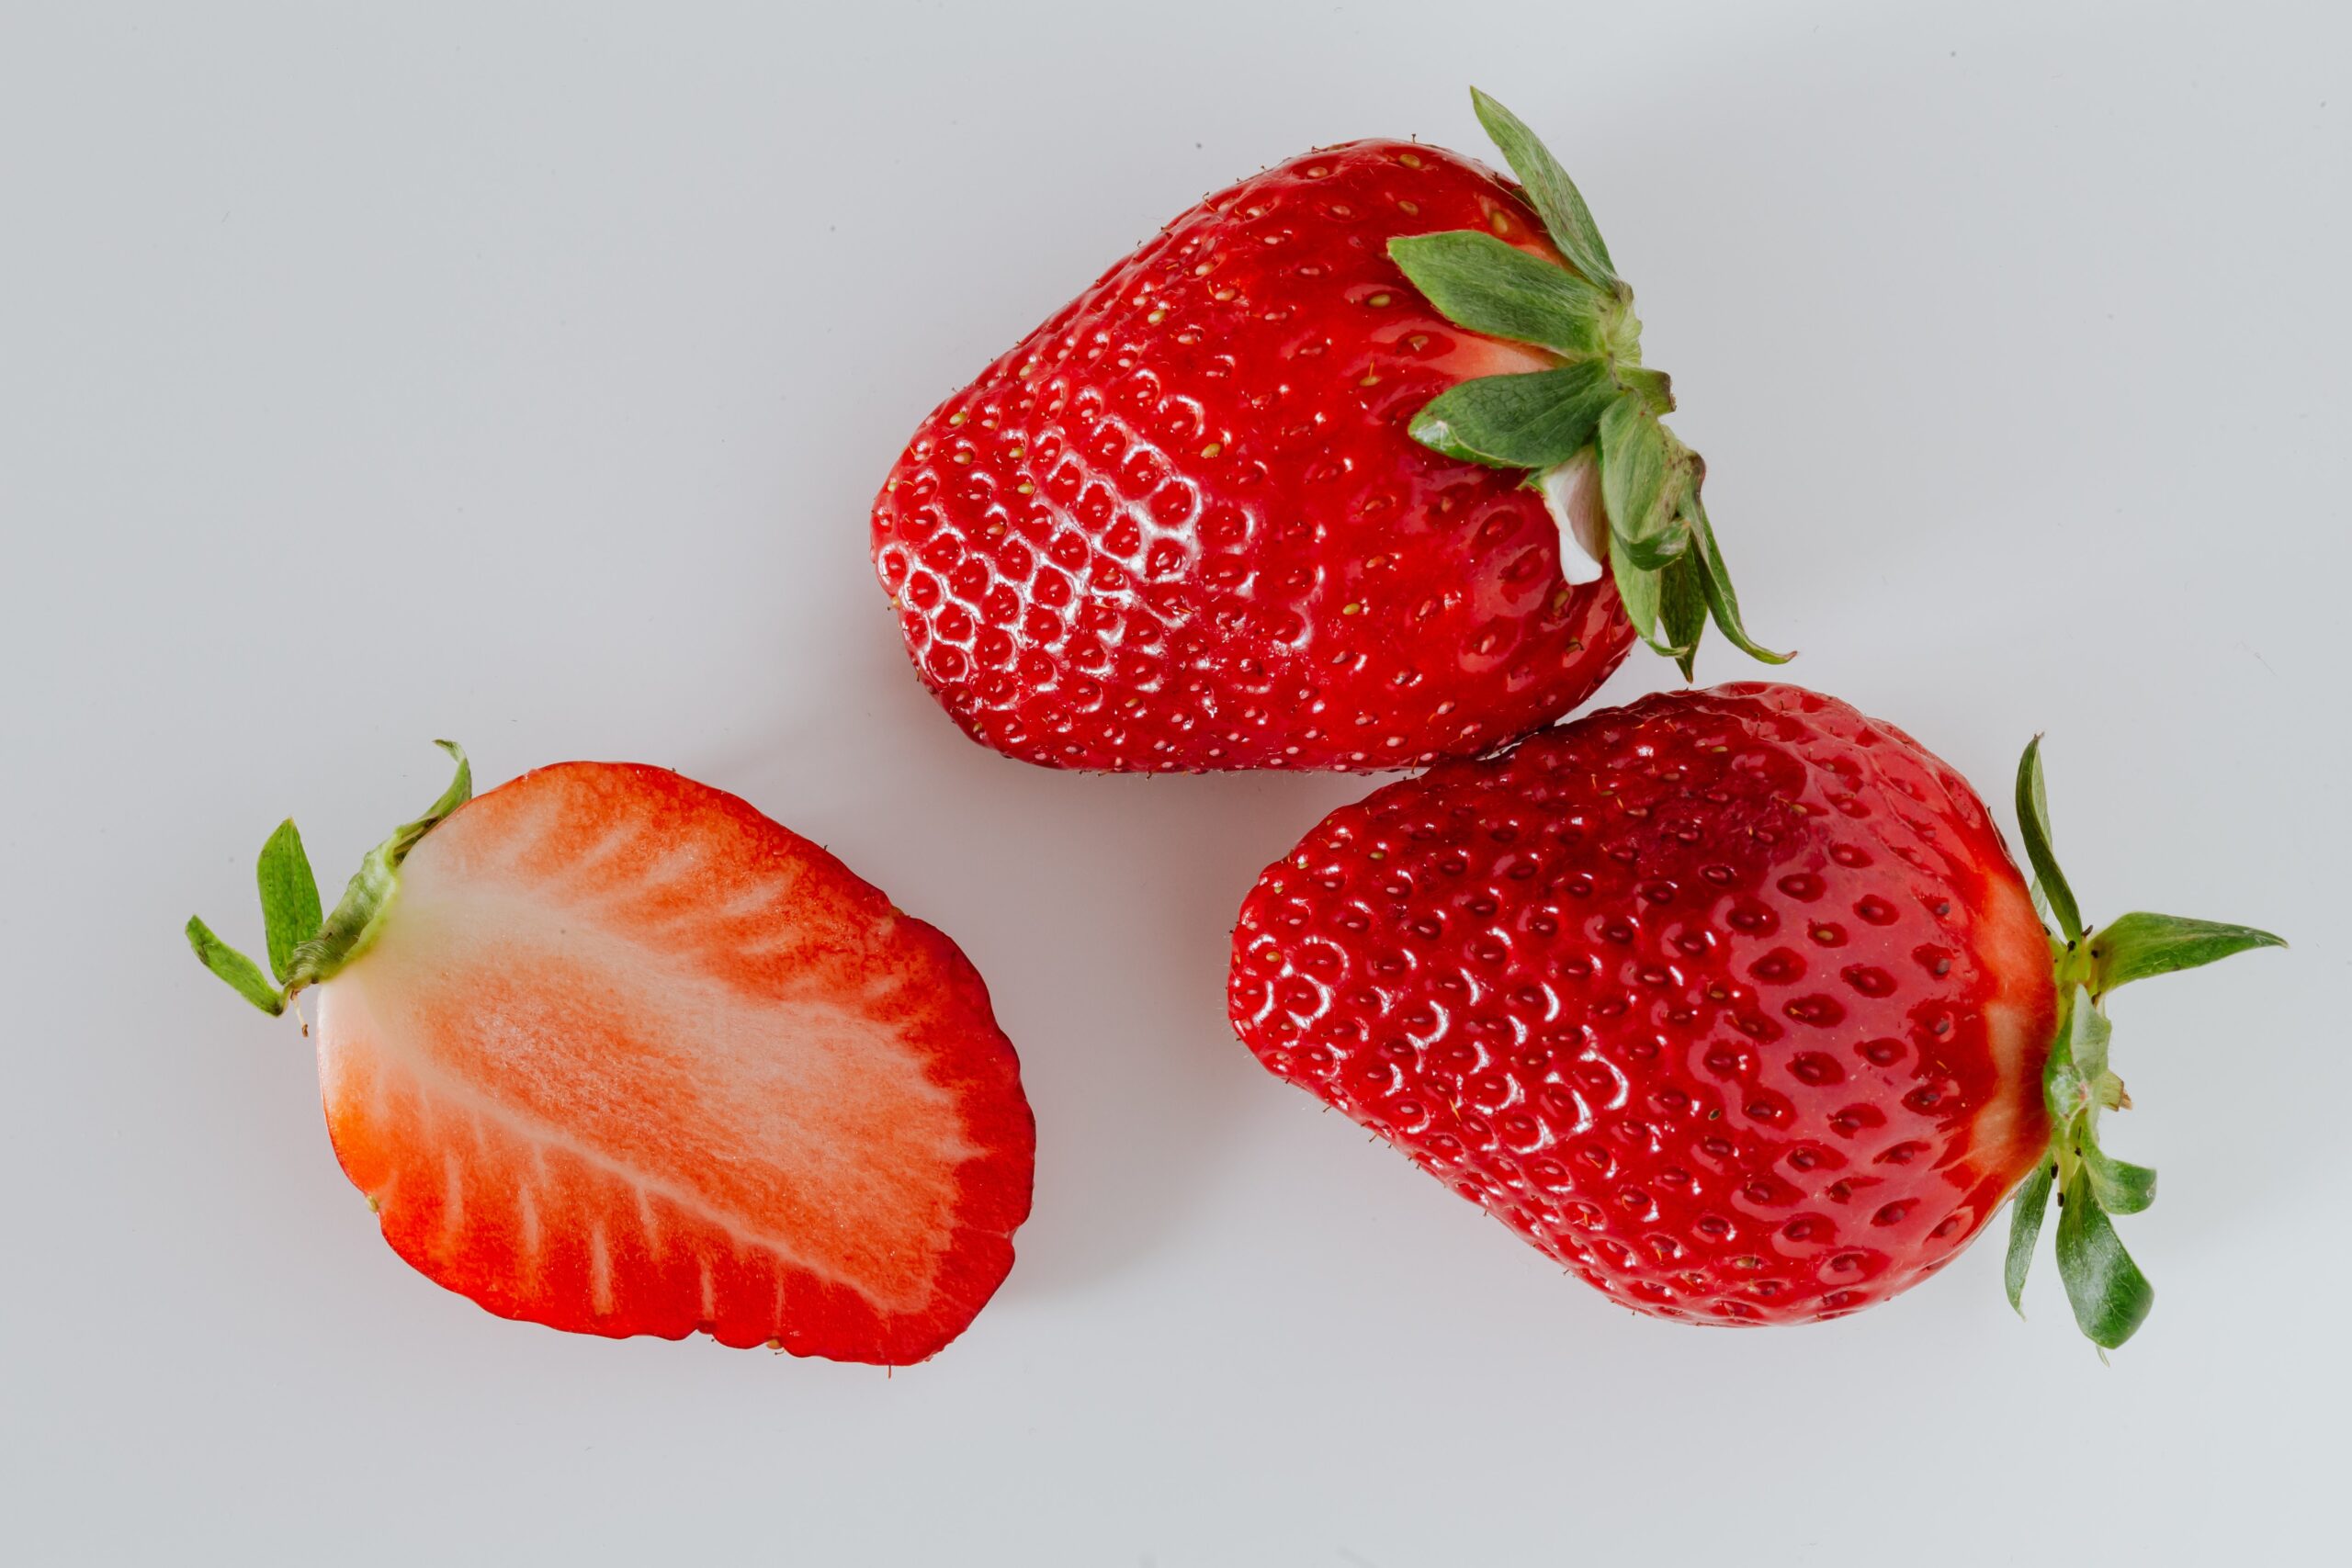 Get this: Fungus can make trash smell like strawberries